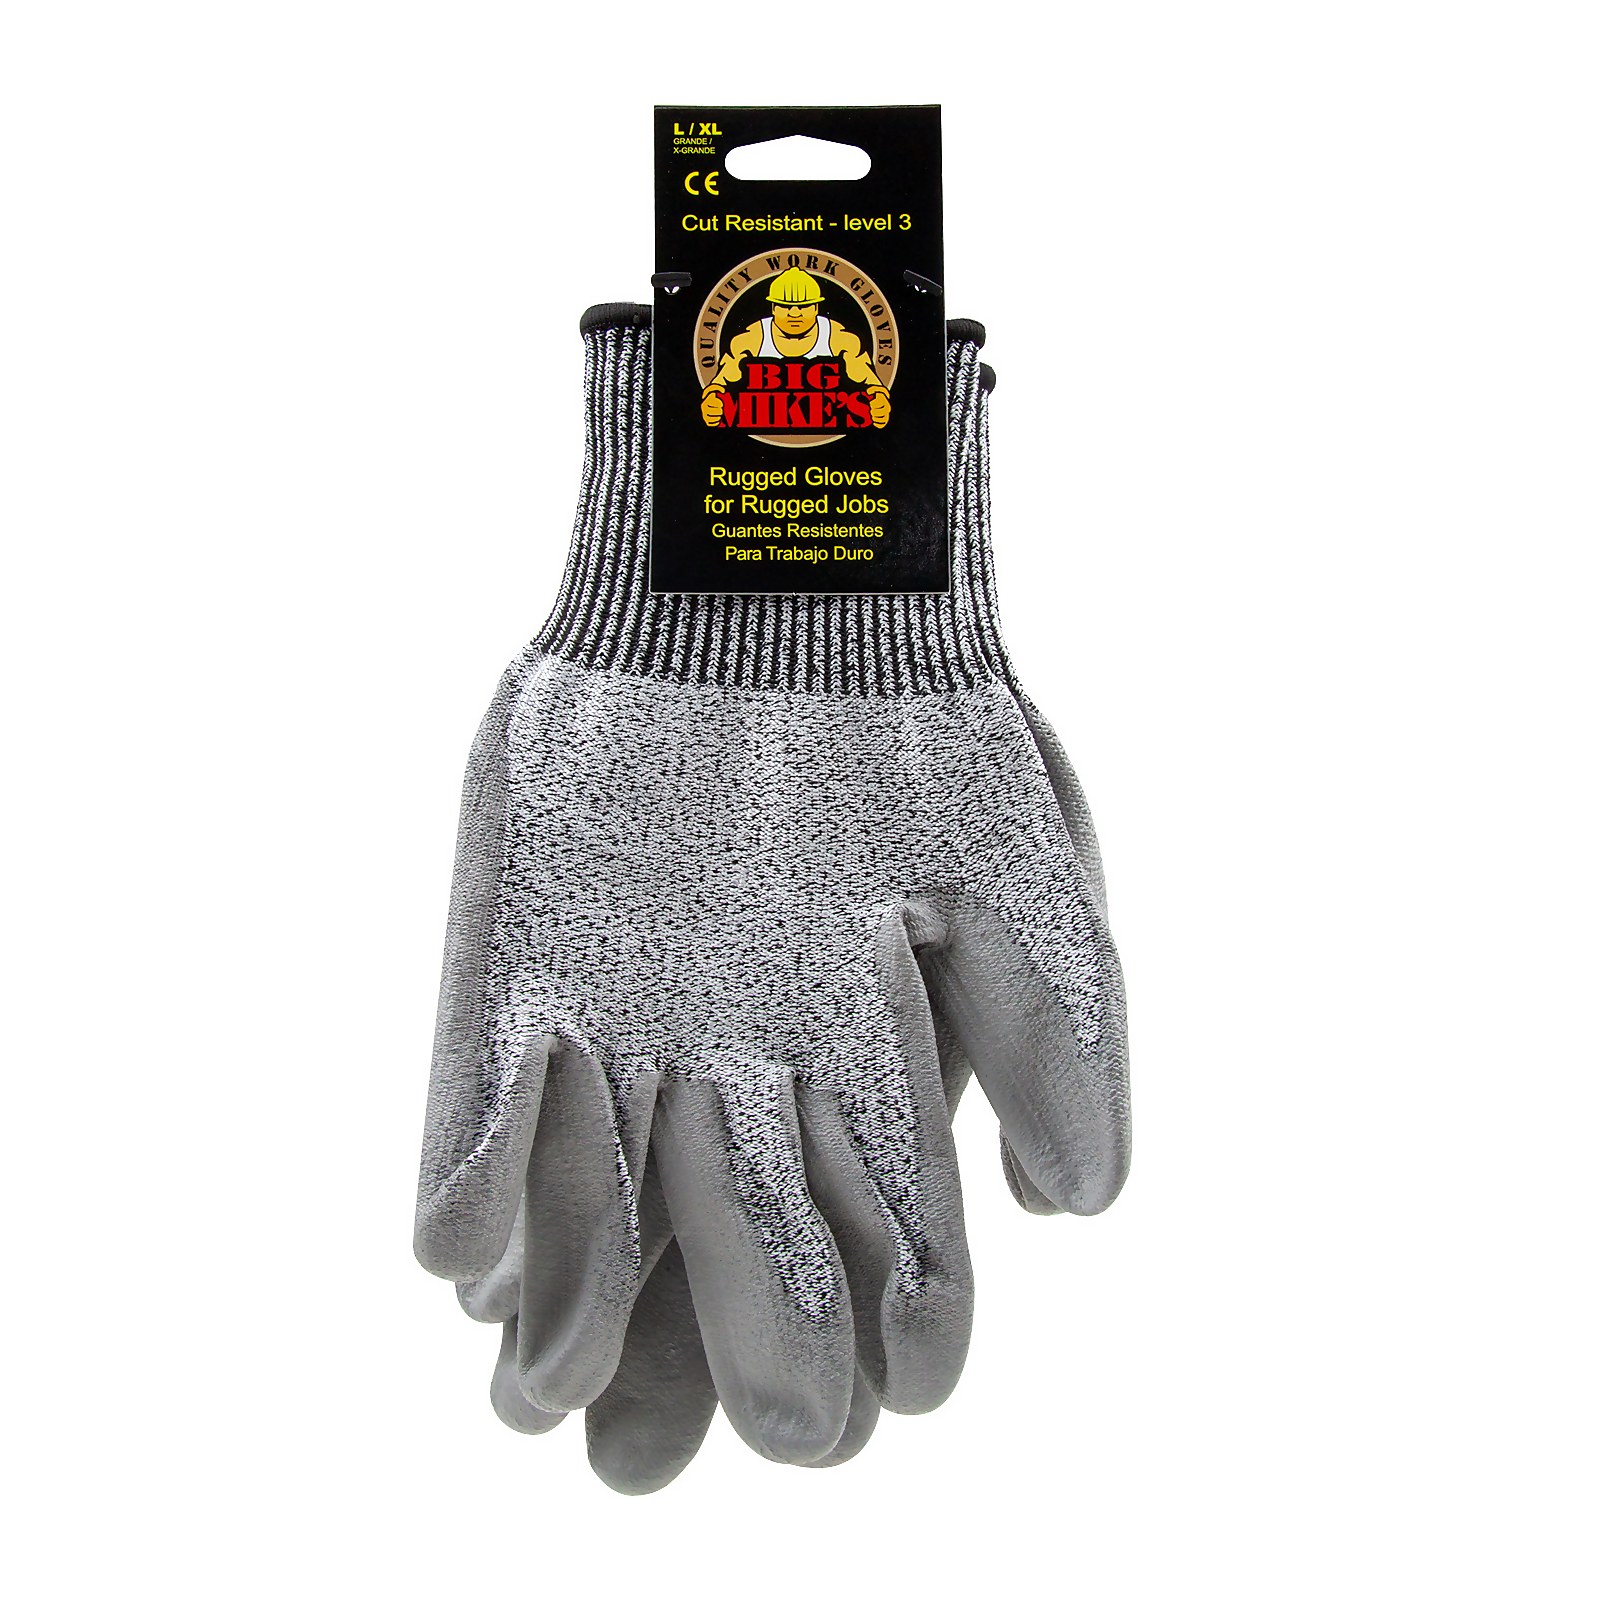 Photo of Big Mikes Cut Resistant Nitrile Dip Gloves - Large/xlarge